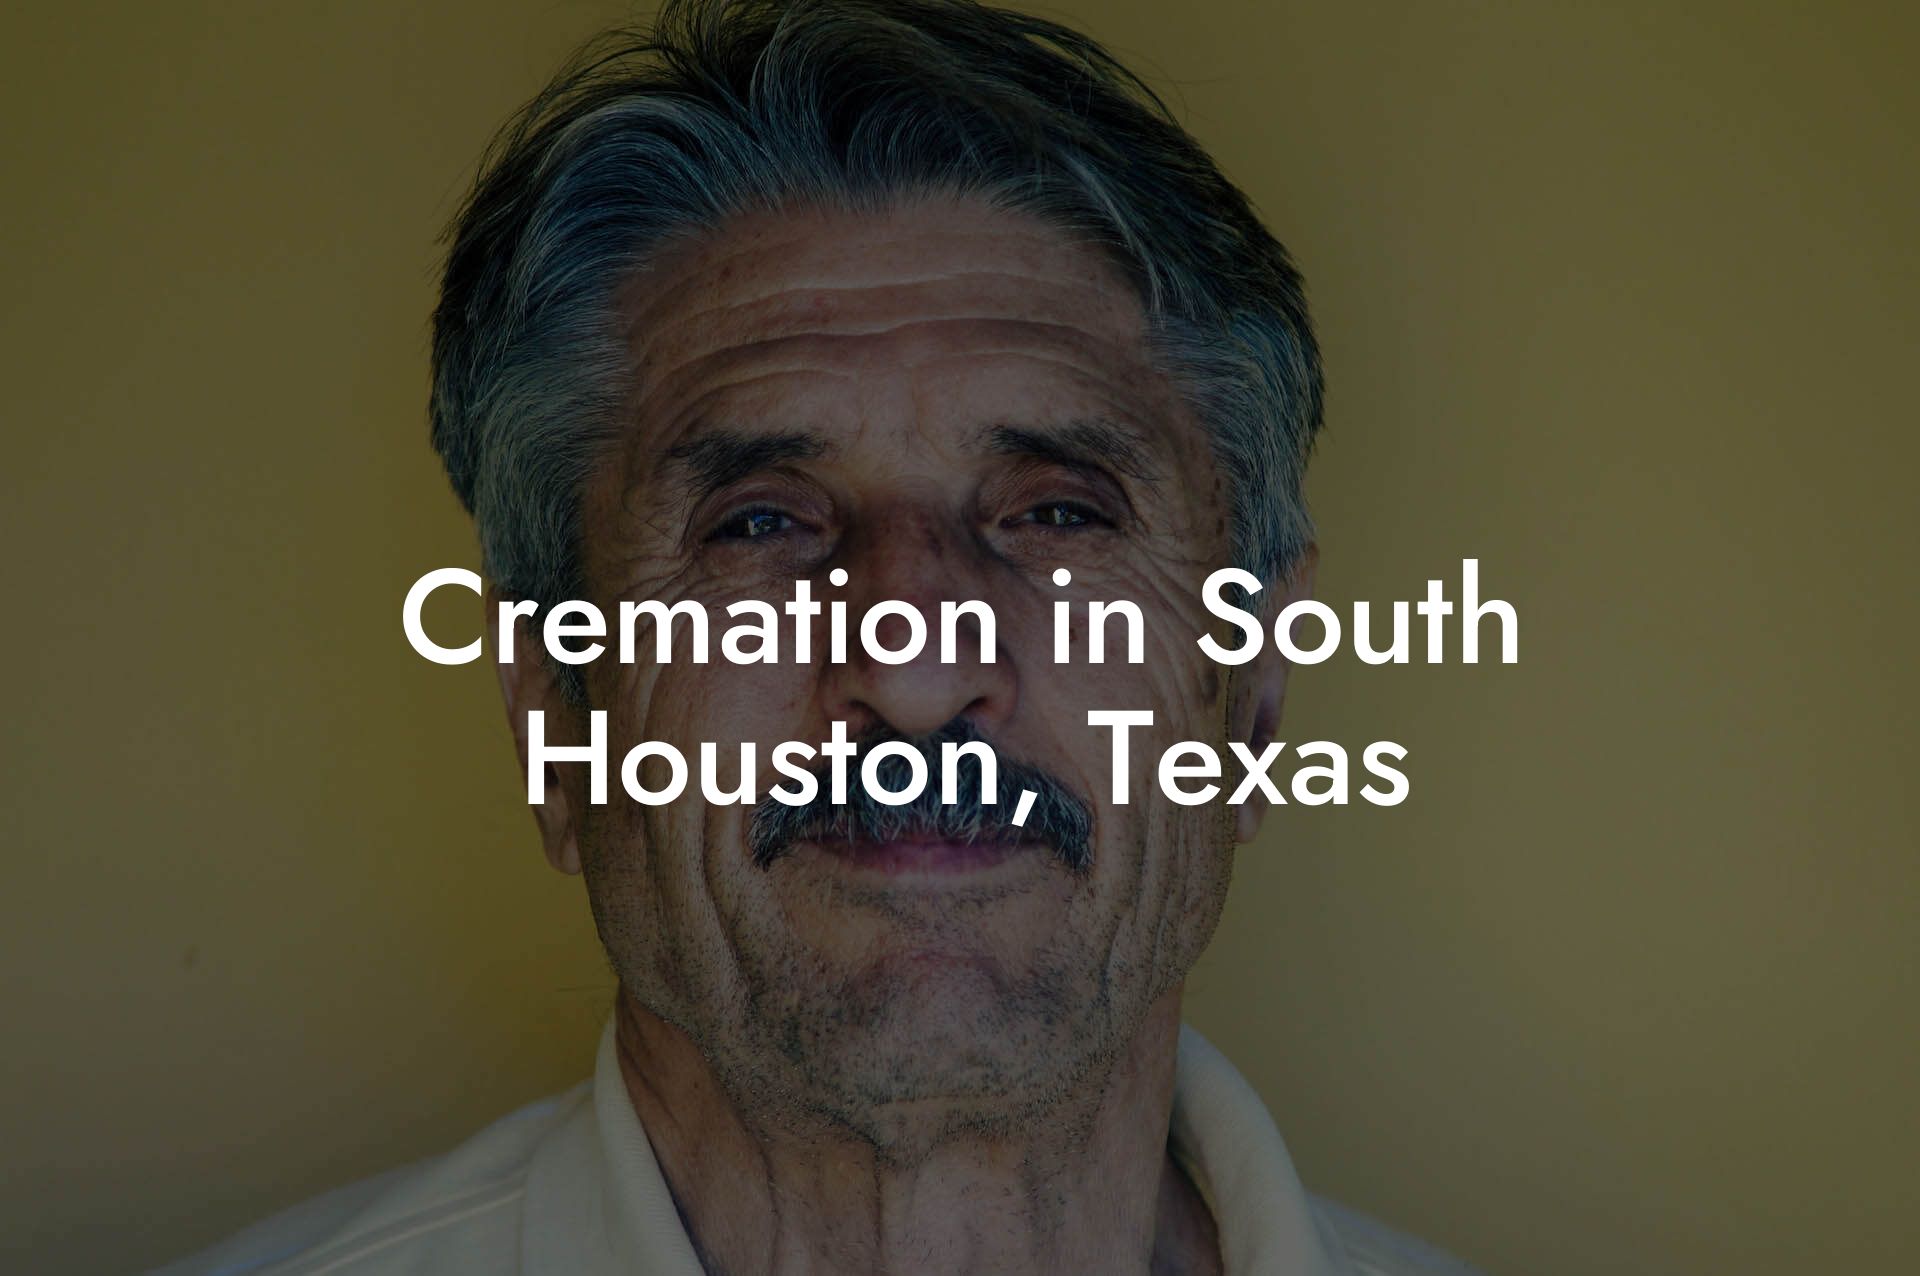 Cremation in South Houston, Texas